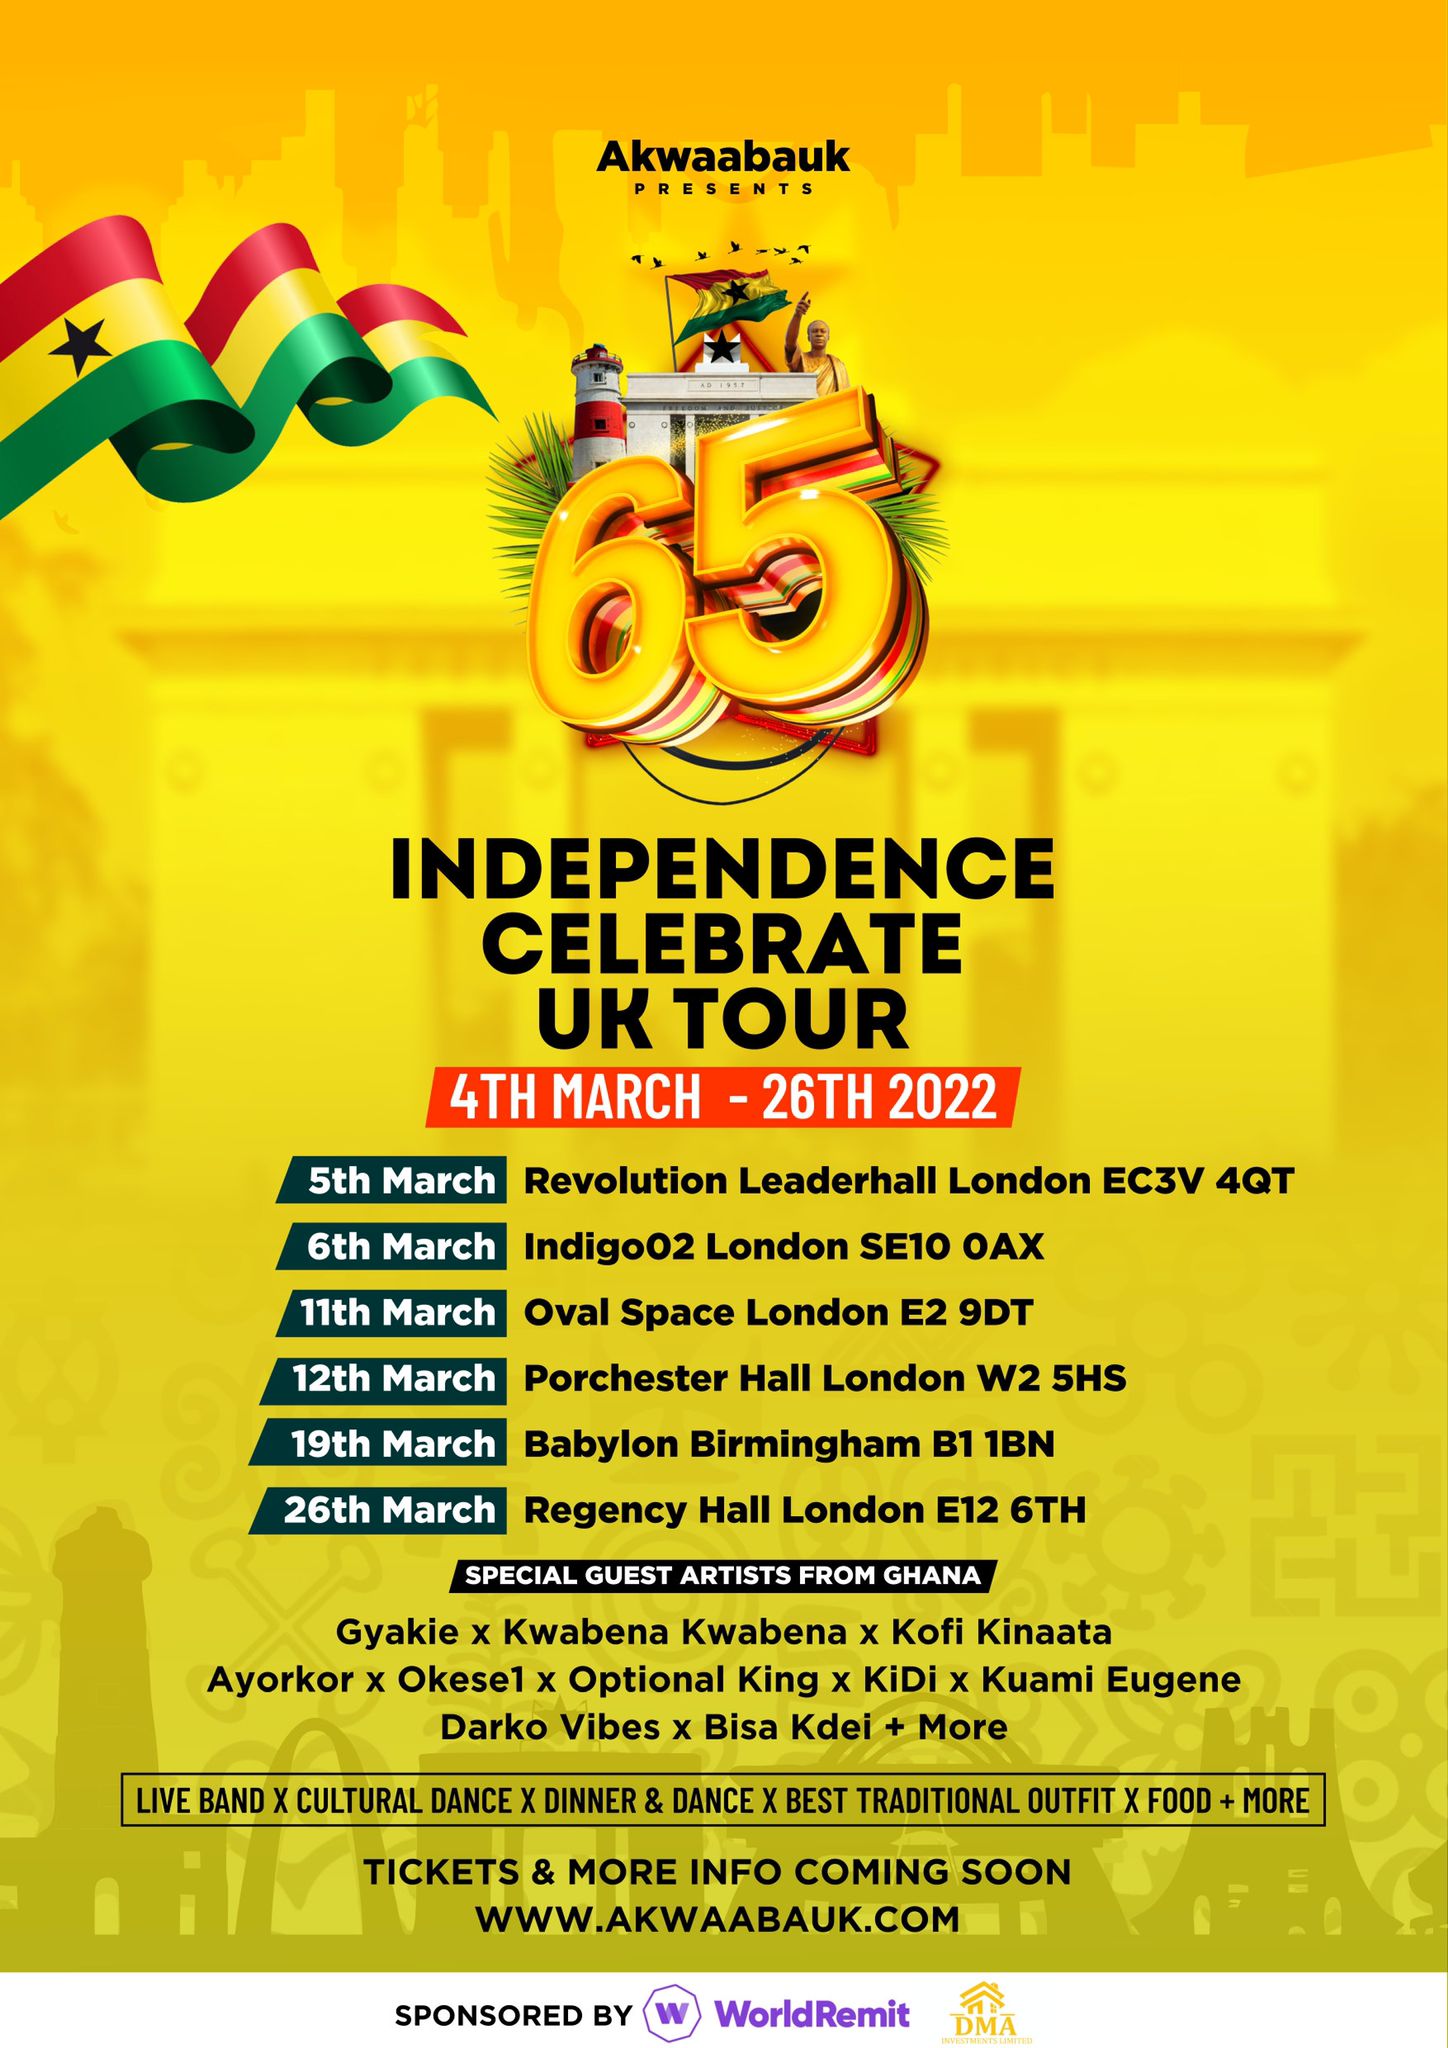 Kidi, Kuami Eugene, Gyakie and others to join Ghana’s Independence Day celebrations in UK